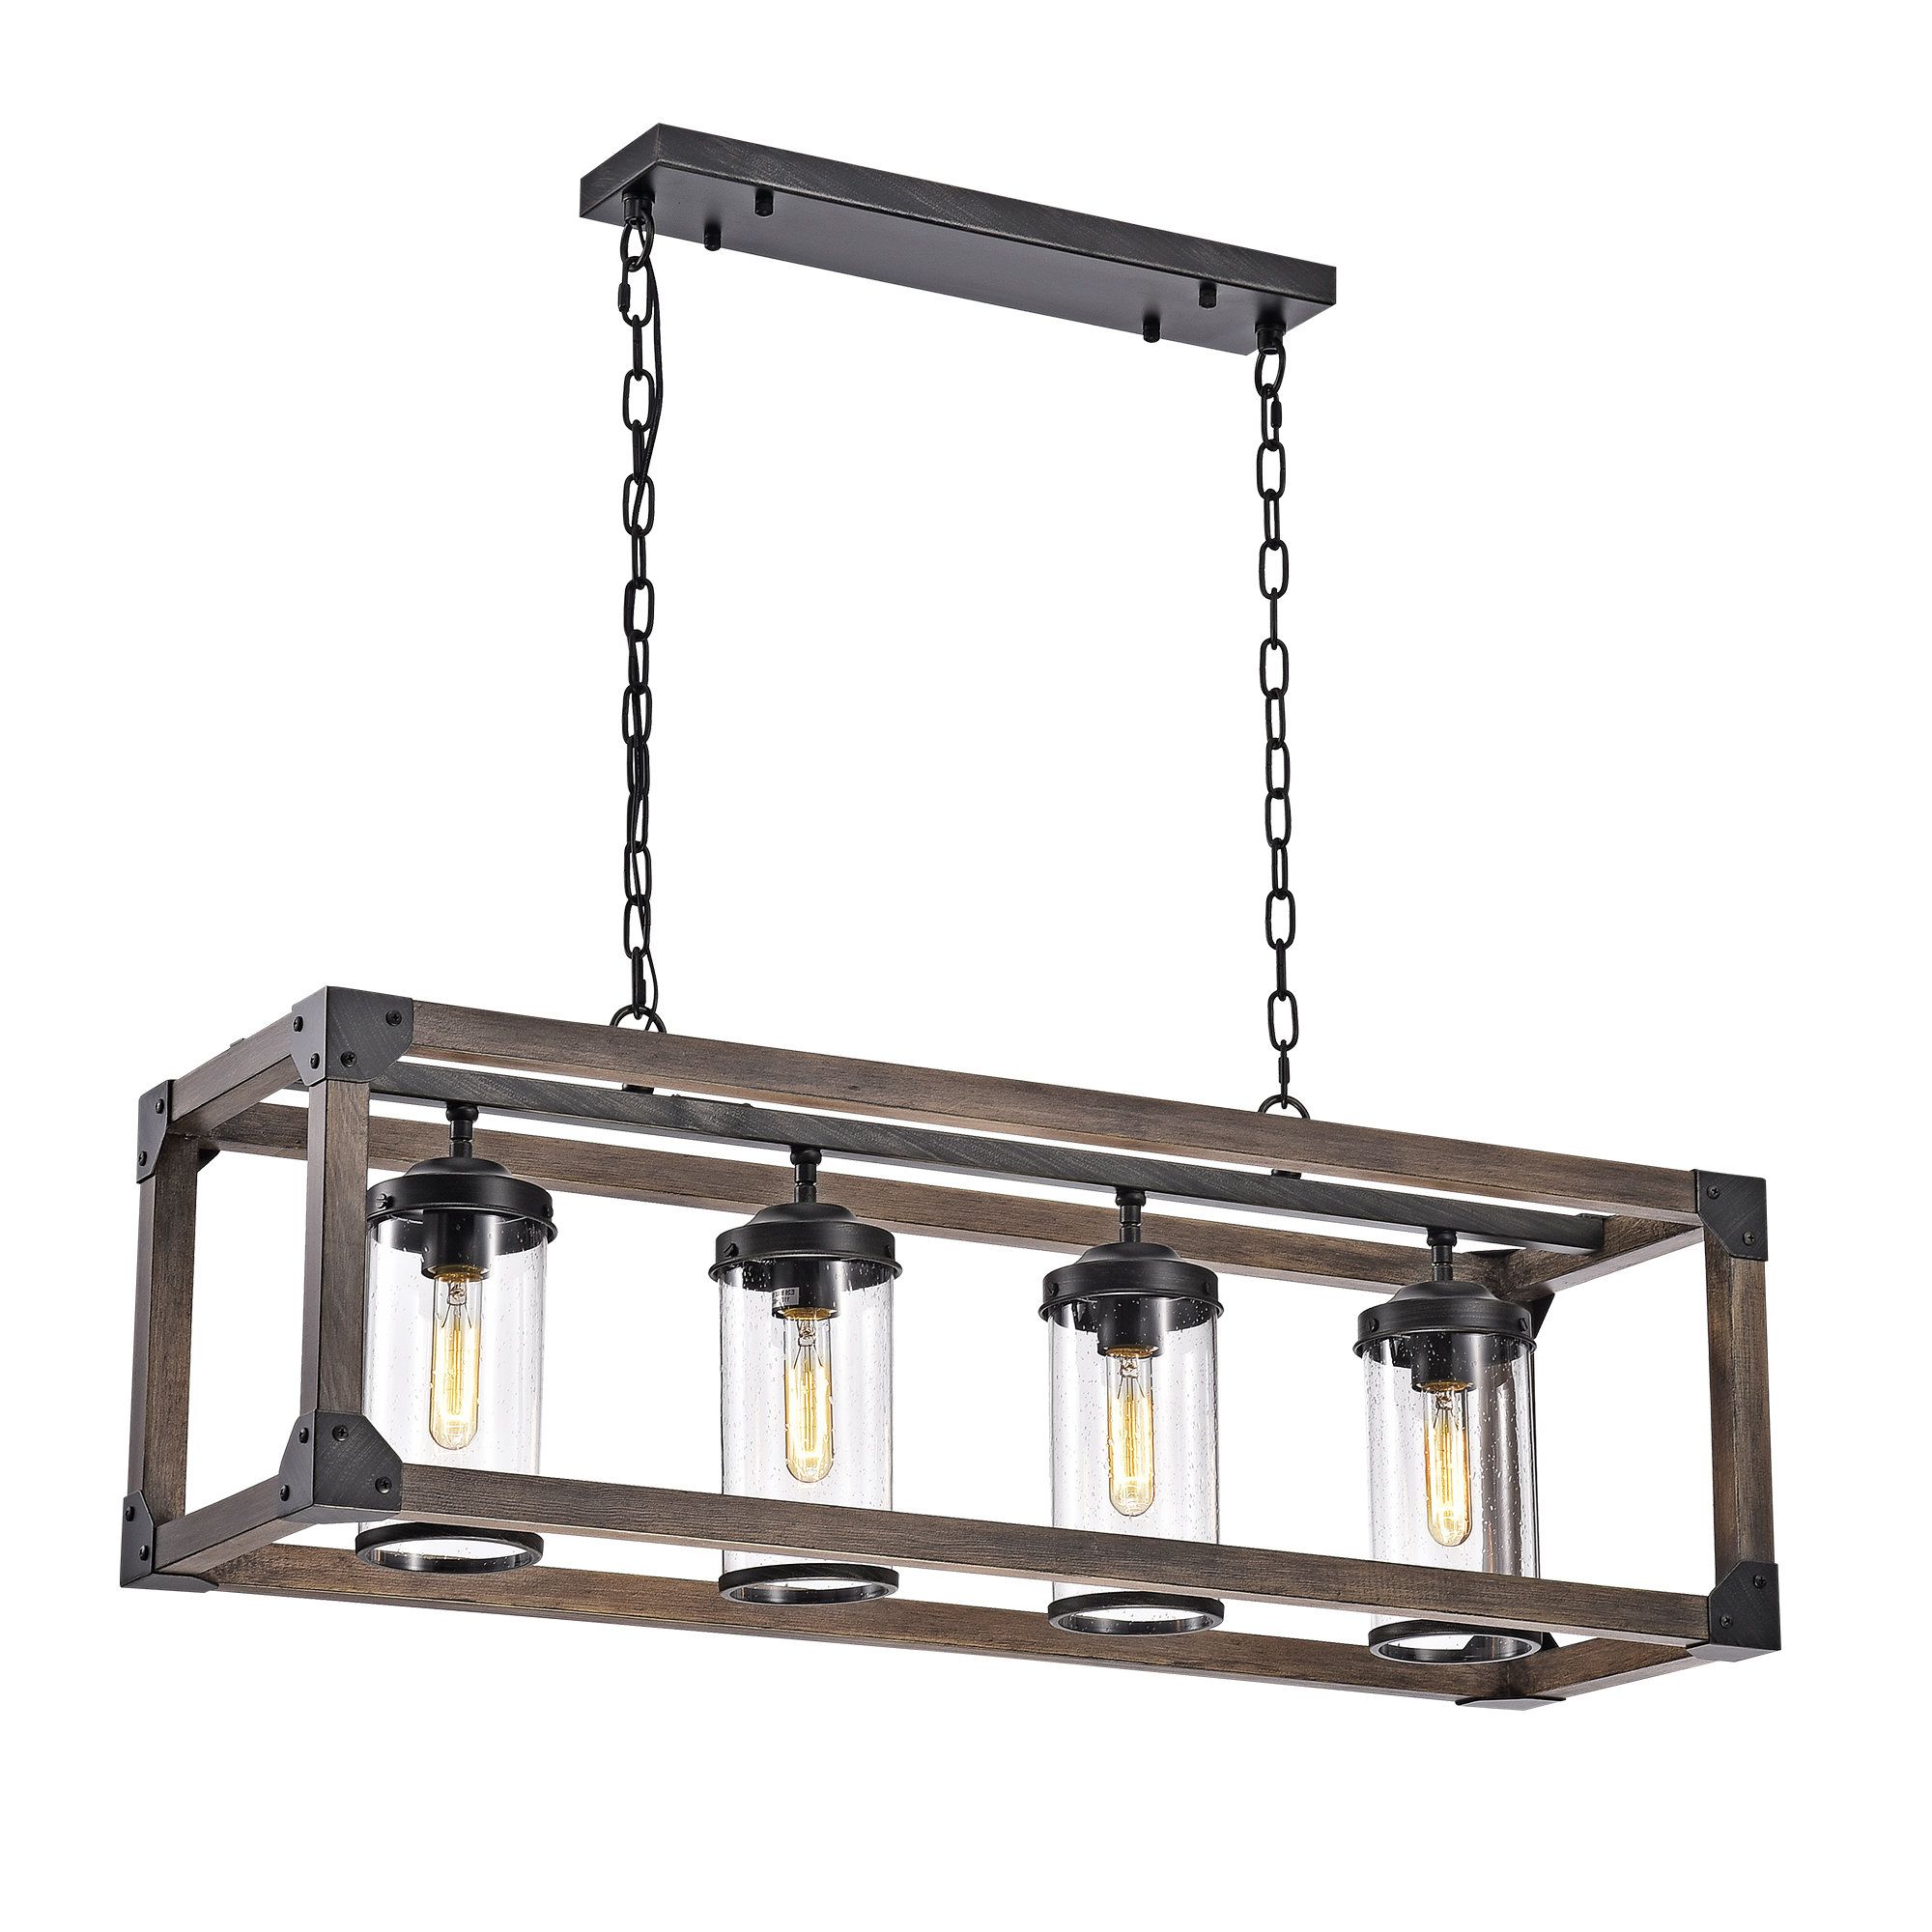 Black Square & Rectangular Chandeliers You'll Love In 2019 Throughout 2019 Hewitt 4 Light Square Chandeliers (View 14 of 20)